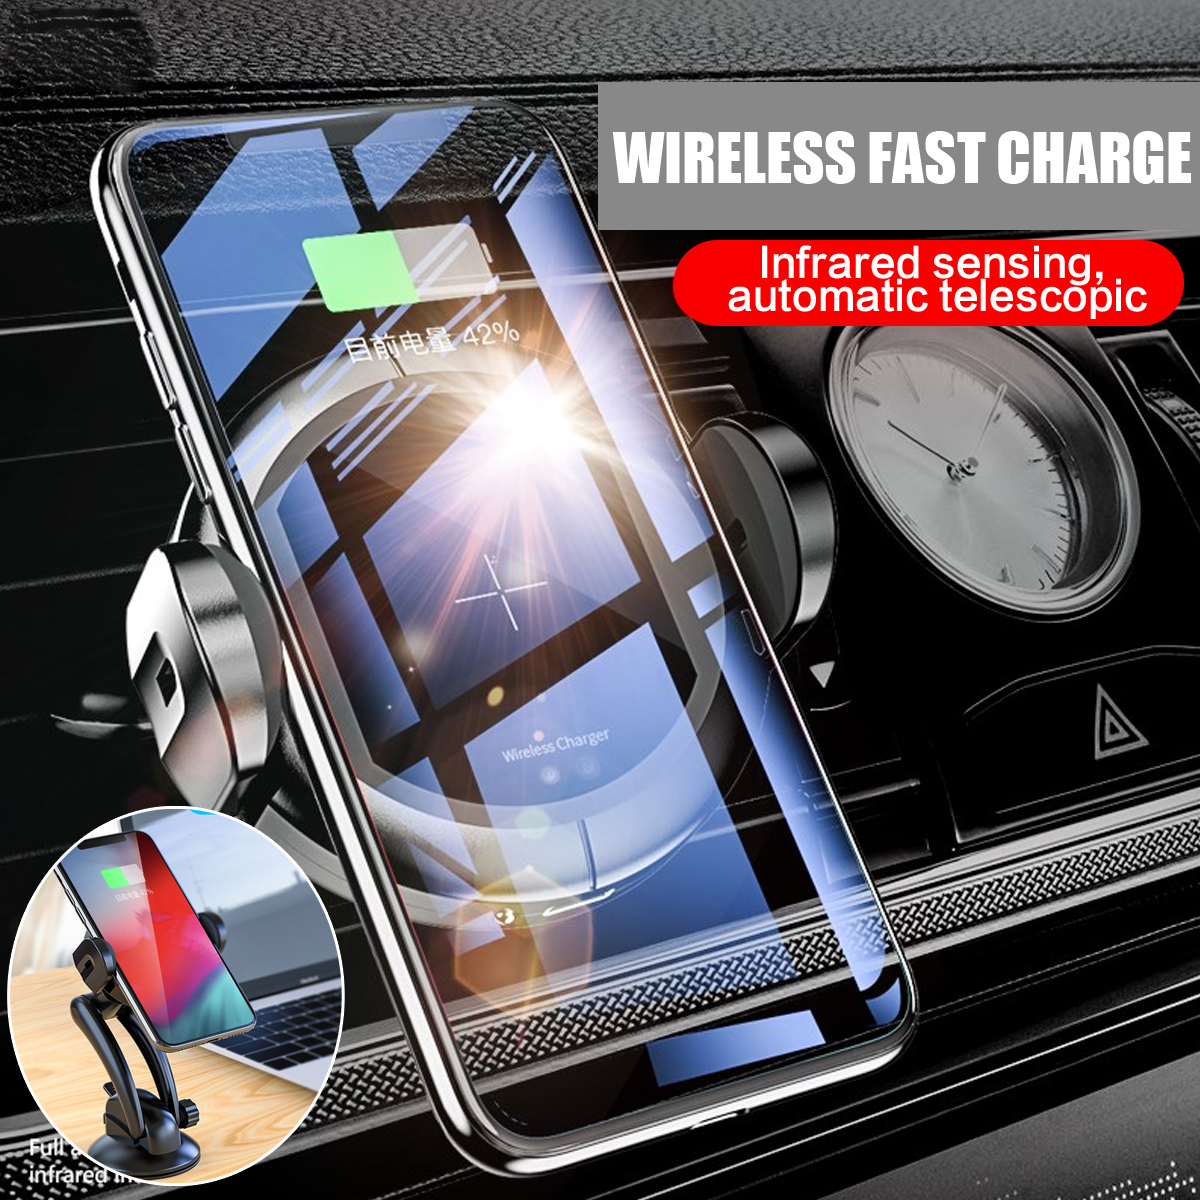 Universal-Intelligent-Infrared-Sensor-10W-Qi-Wireless-Fast-Charge-Car-Holder-for-iPhone-Mobile-Phone-1405205-1